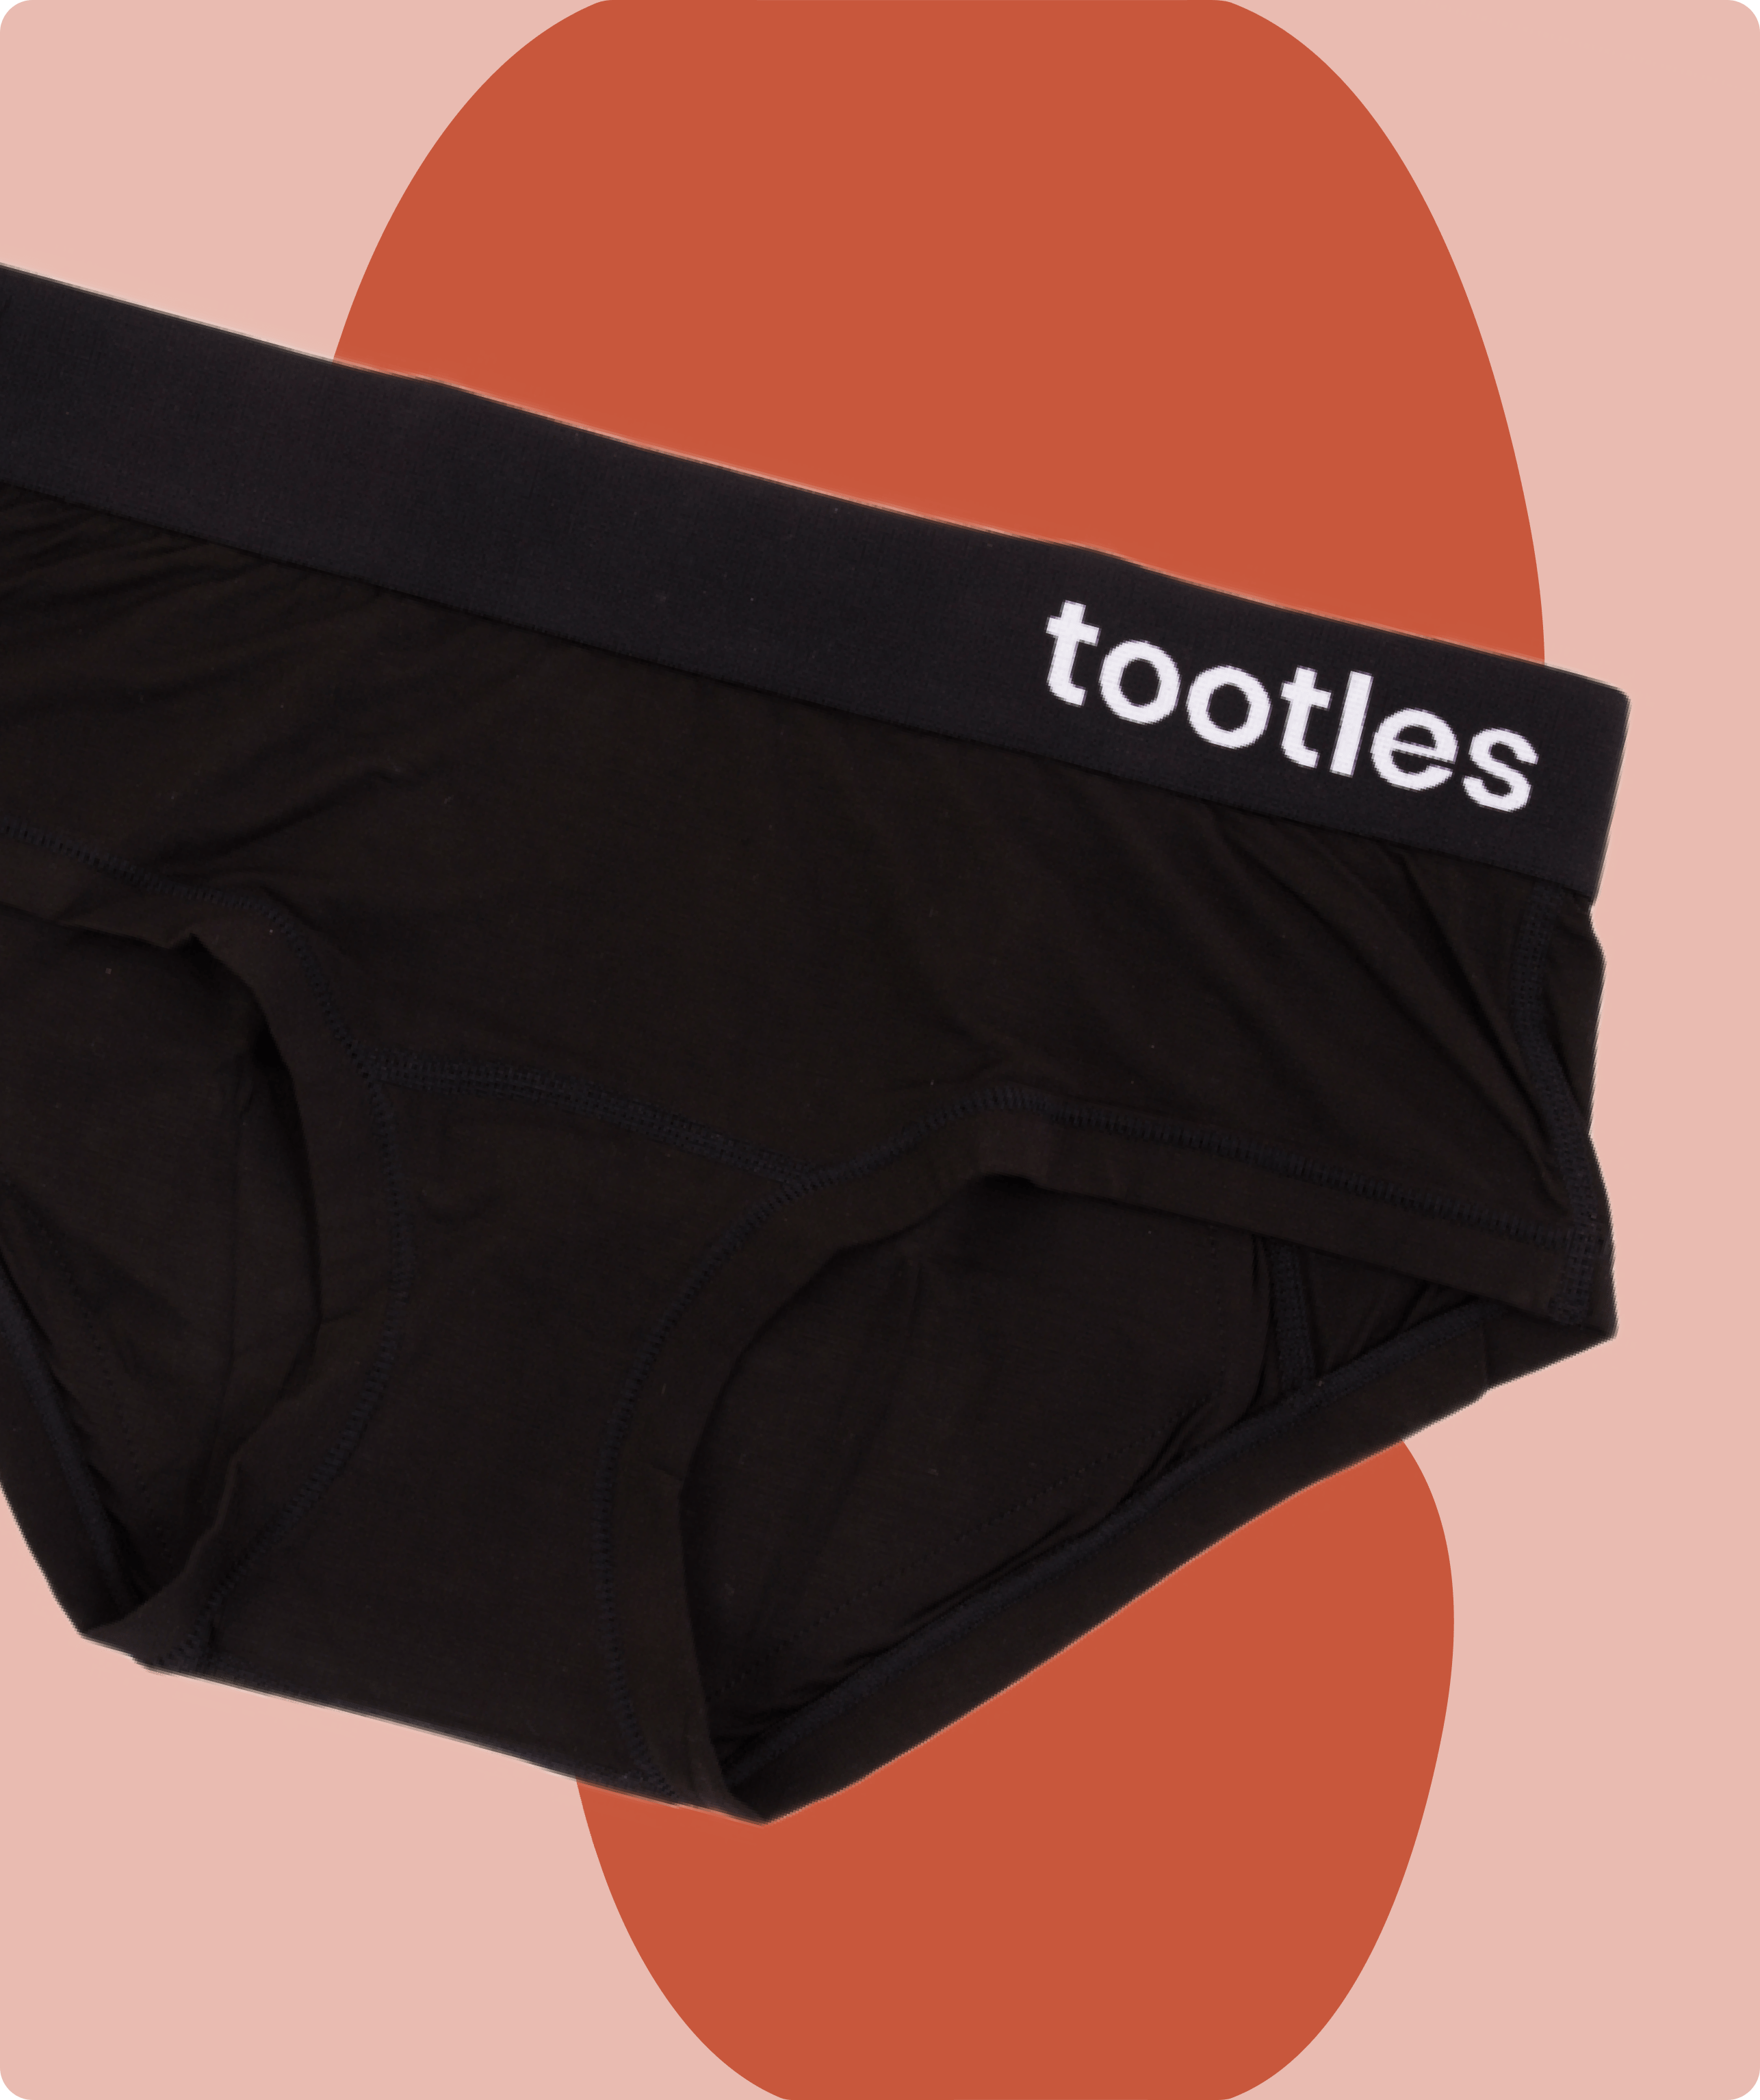  Stitches Medical Fart Filtering Underwear by TOOTLES